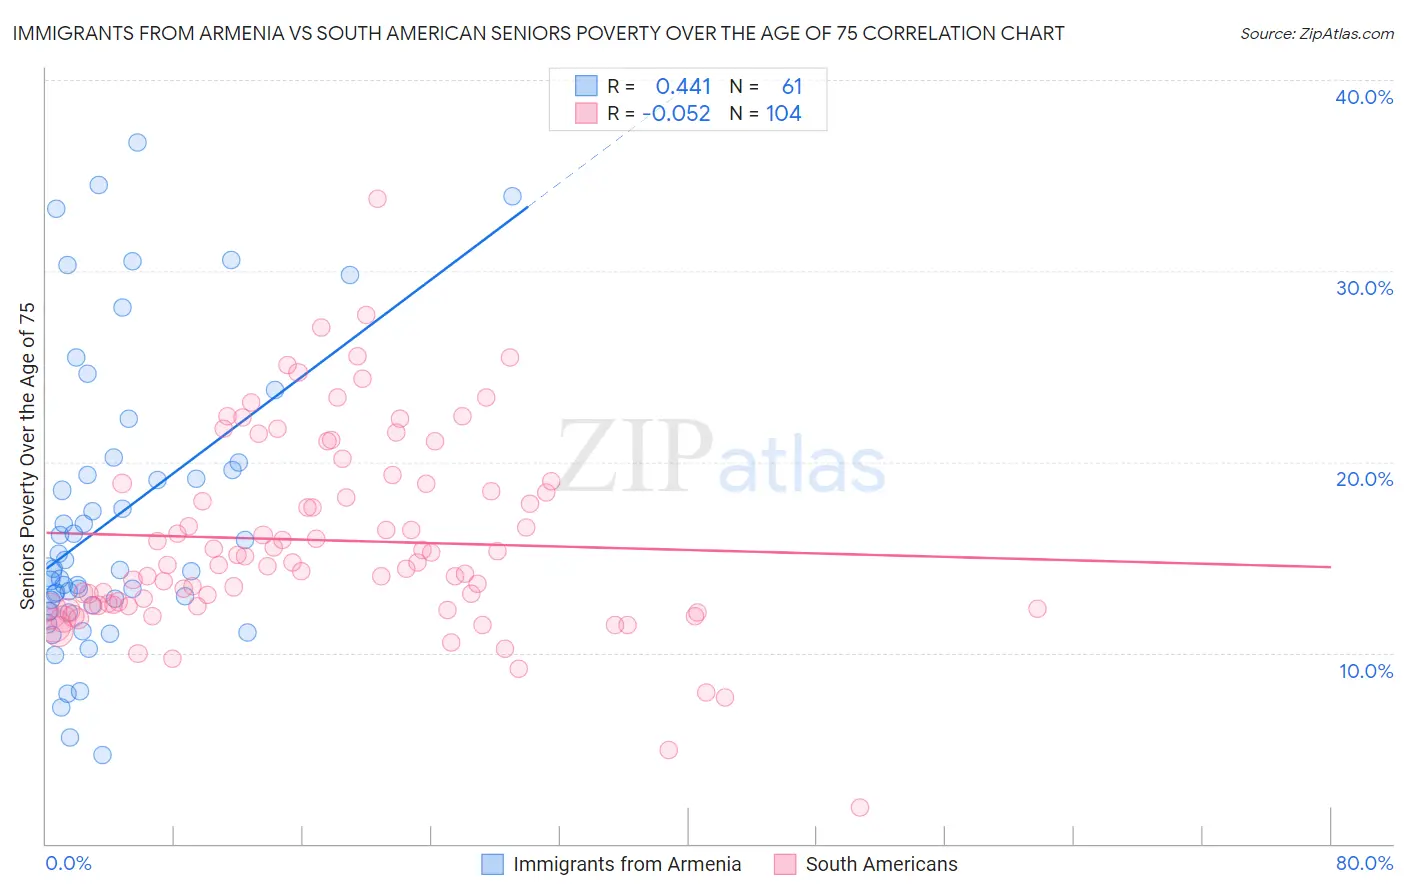 Immigrants from Armenia vs South American Seniors Poverty Over the Age of 75